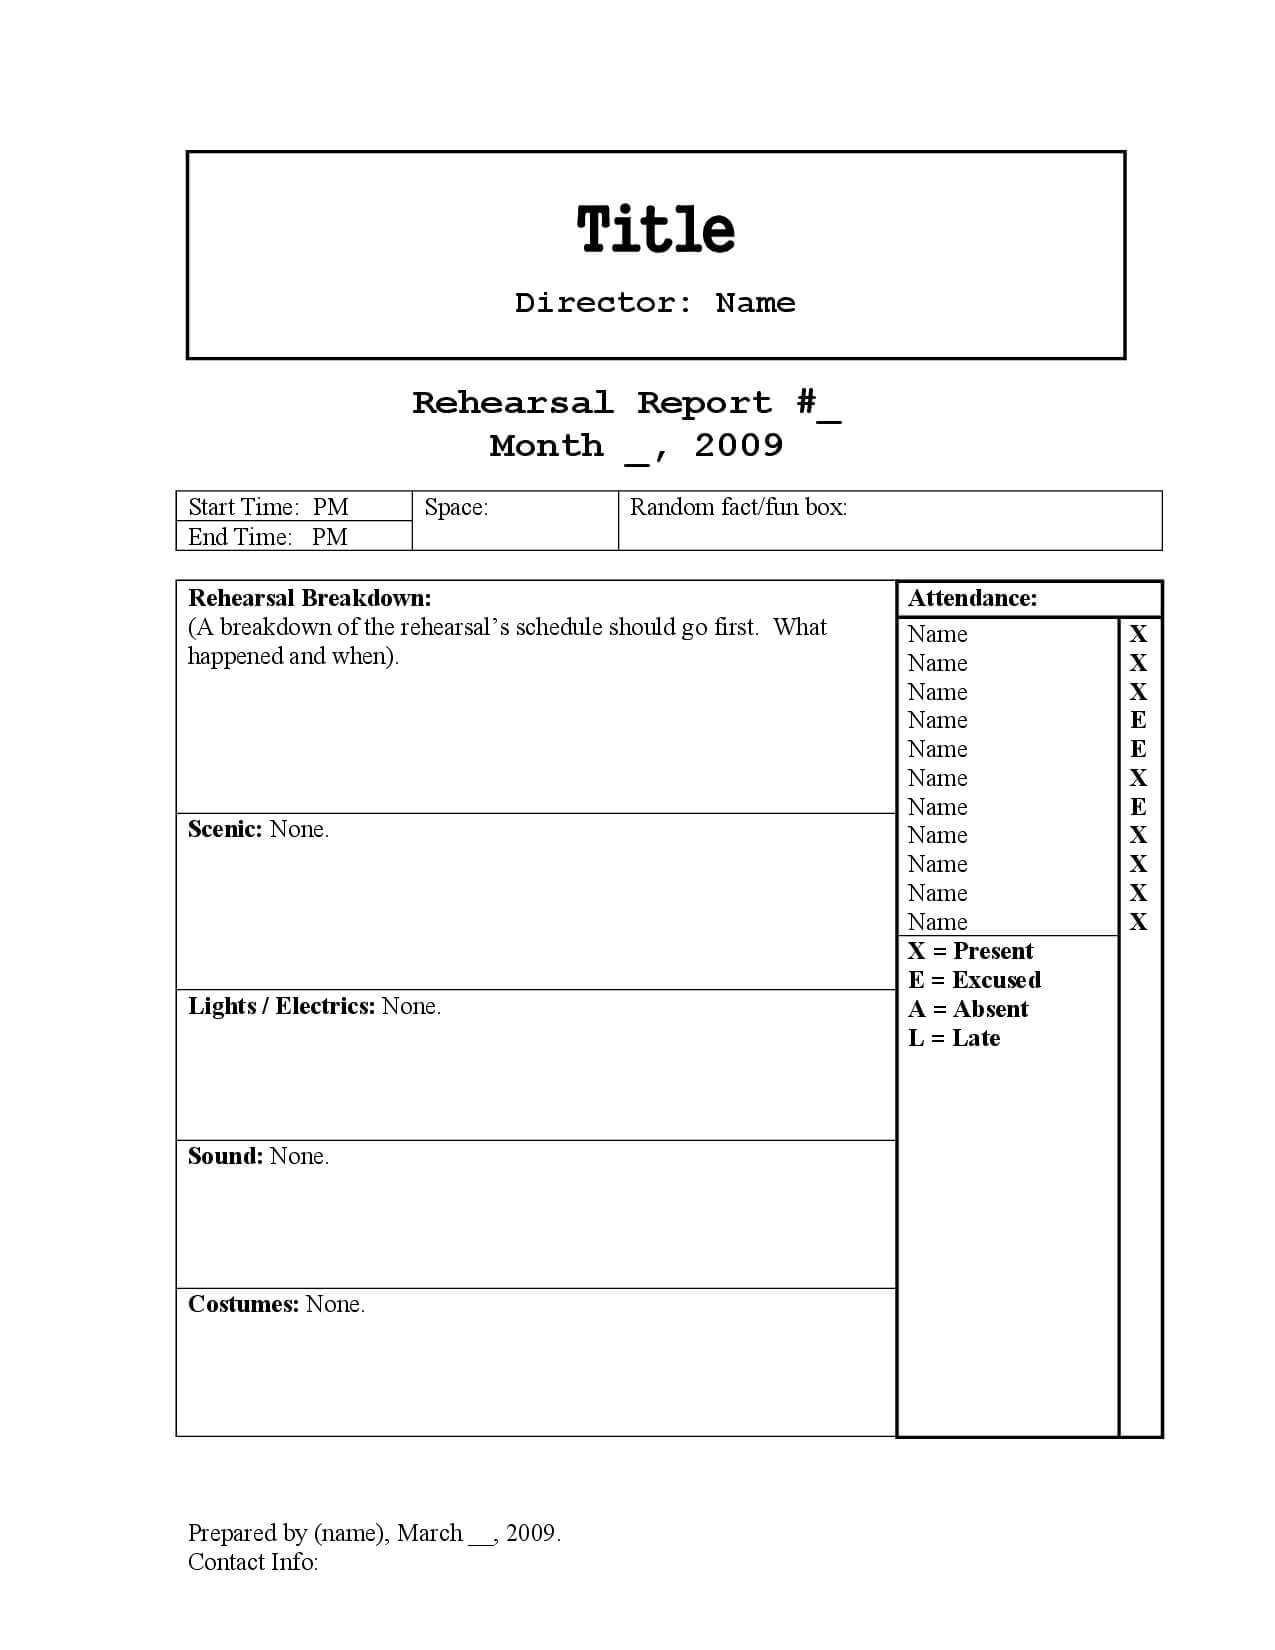 Rehearsal Report Template | Stage Manager In 2019 | Project Regarding Rehearsal Report Template